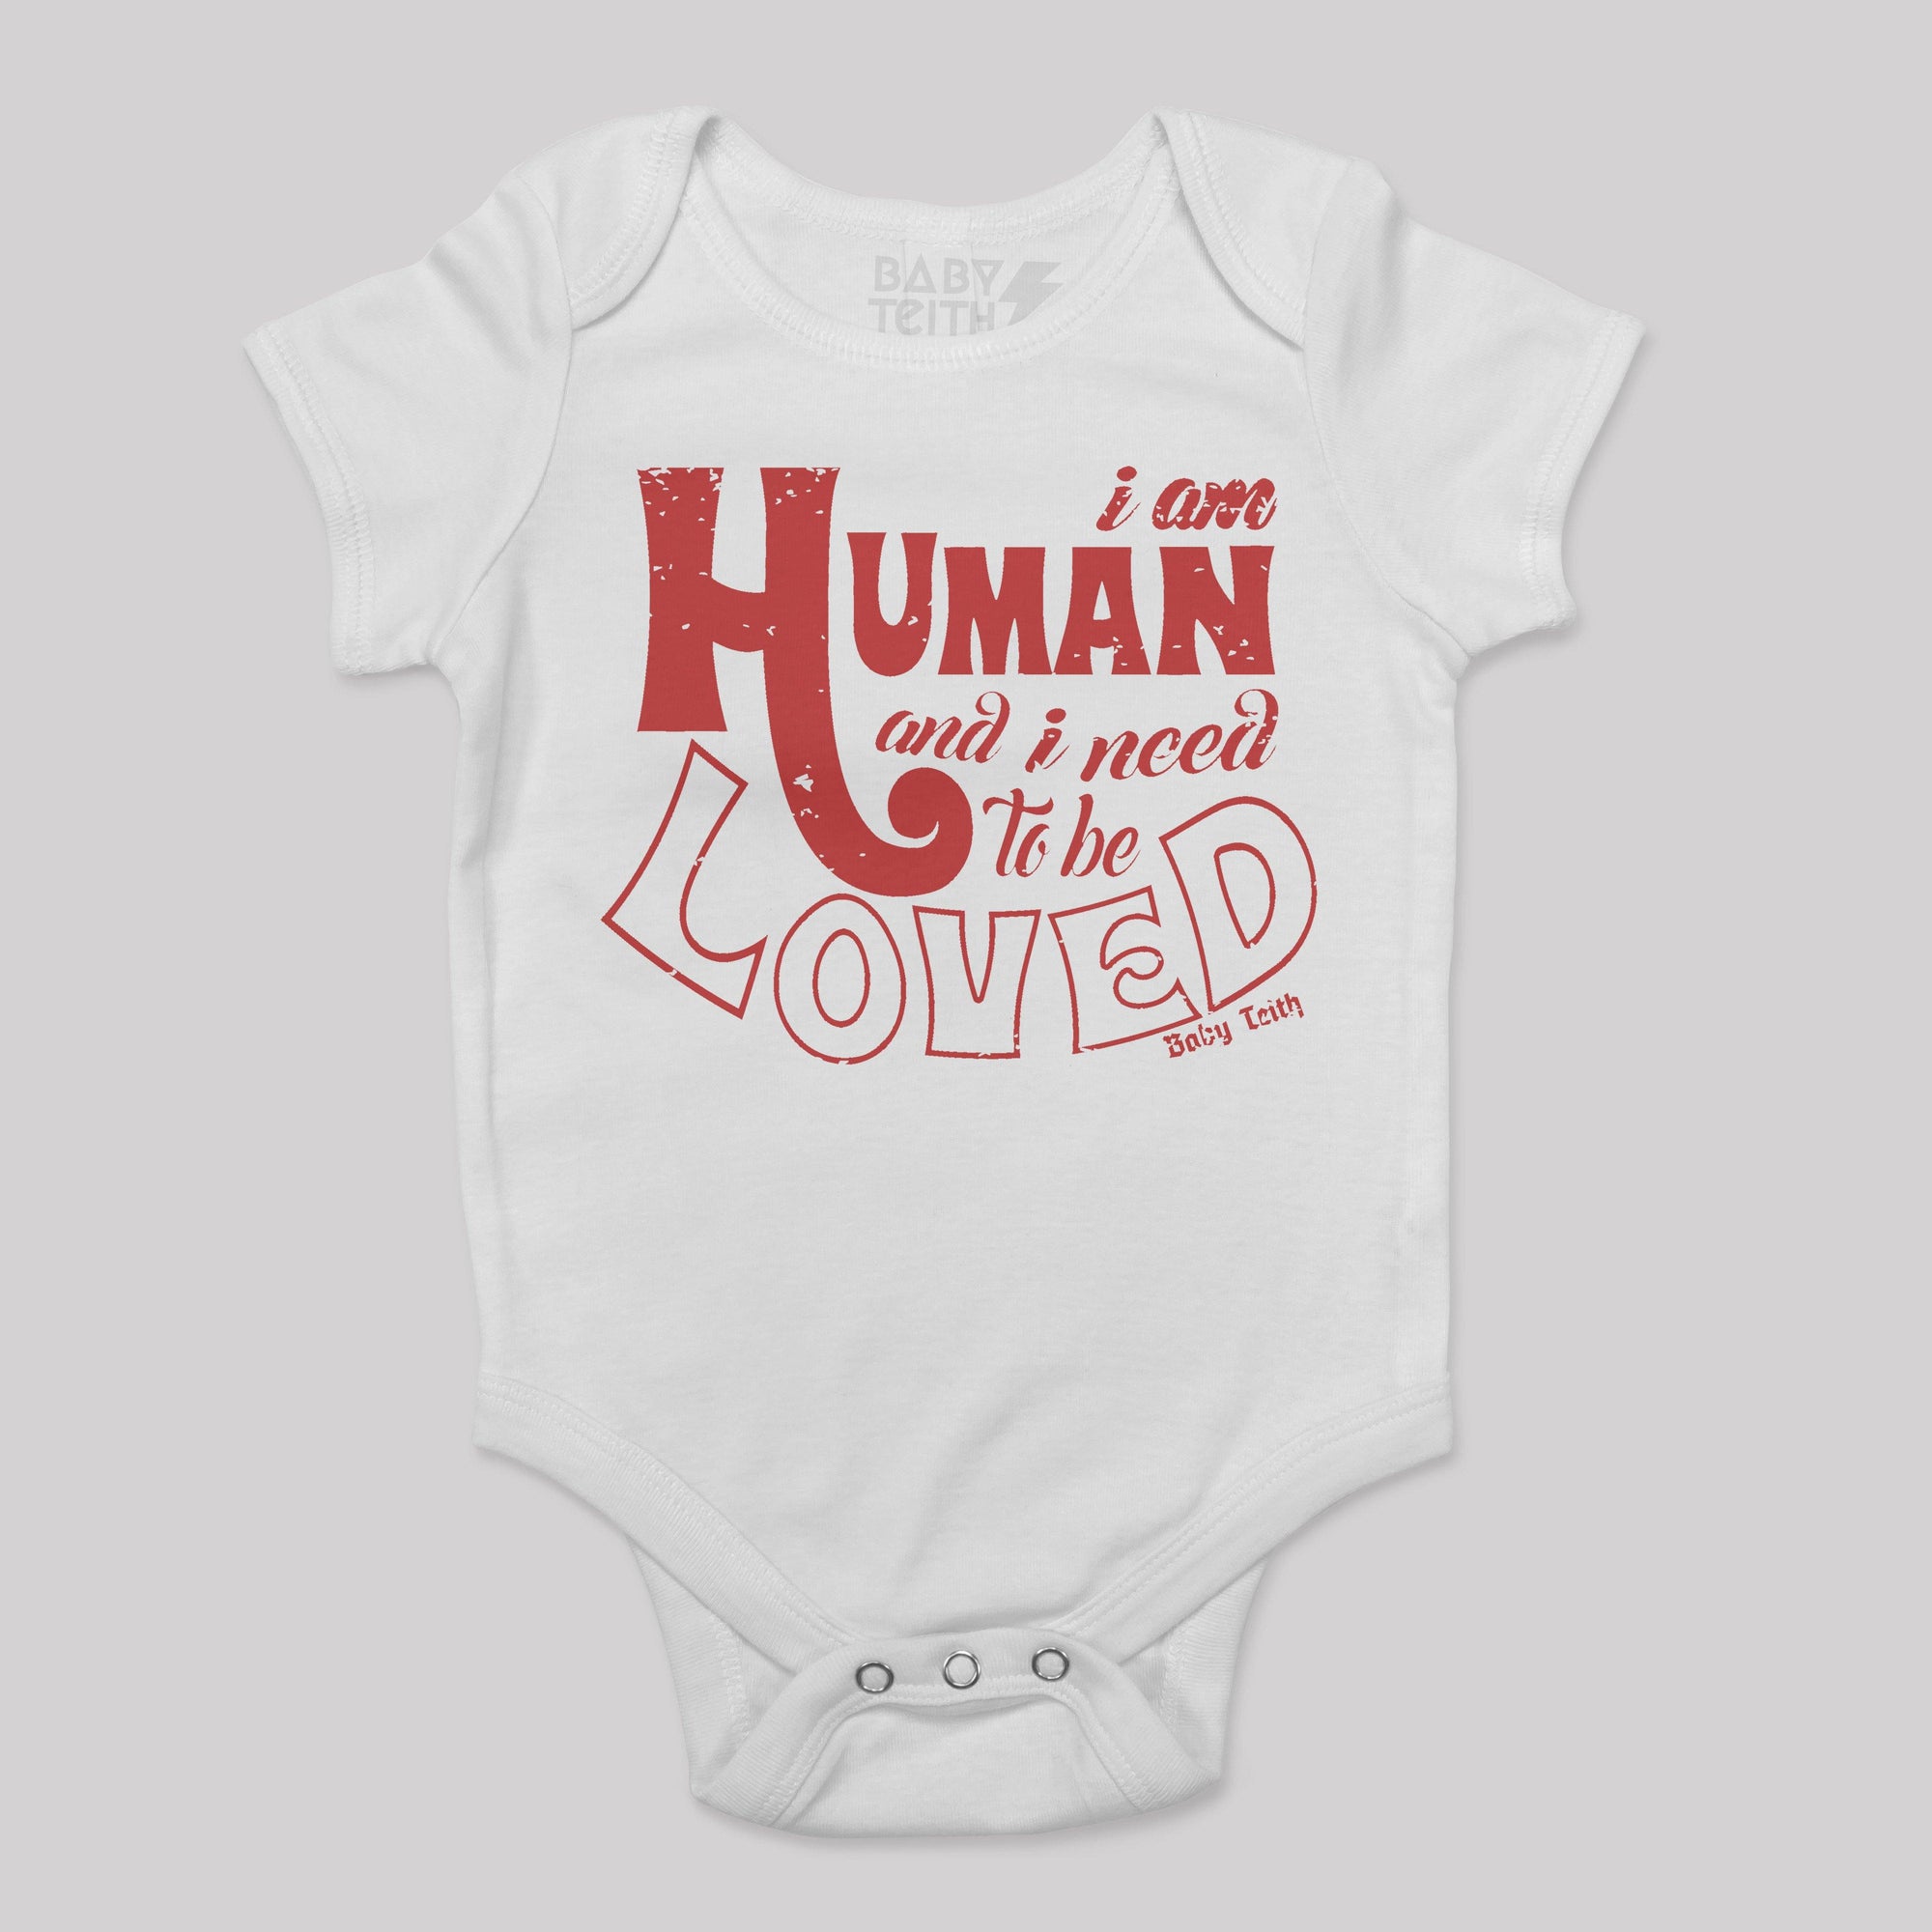 &quot;I am Human&quot; Short Sleeve Baby Bodysuit (6 colors) - Baby Teith